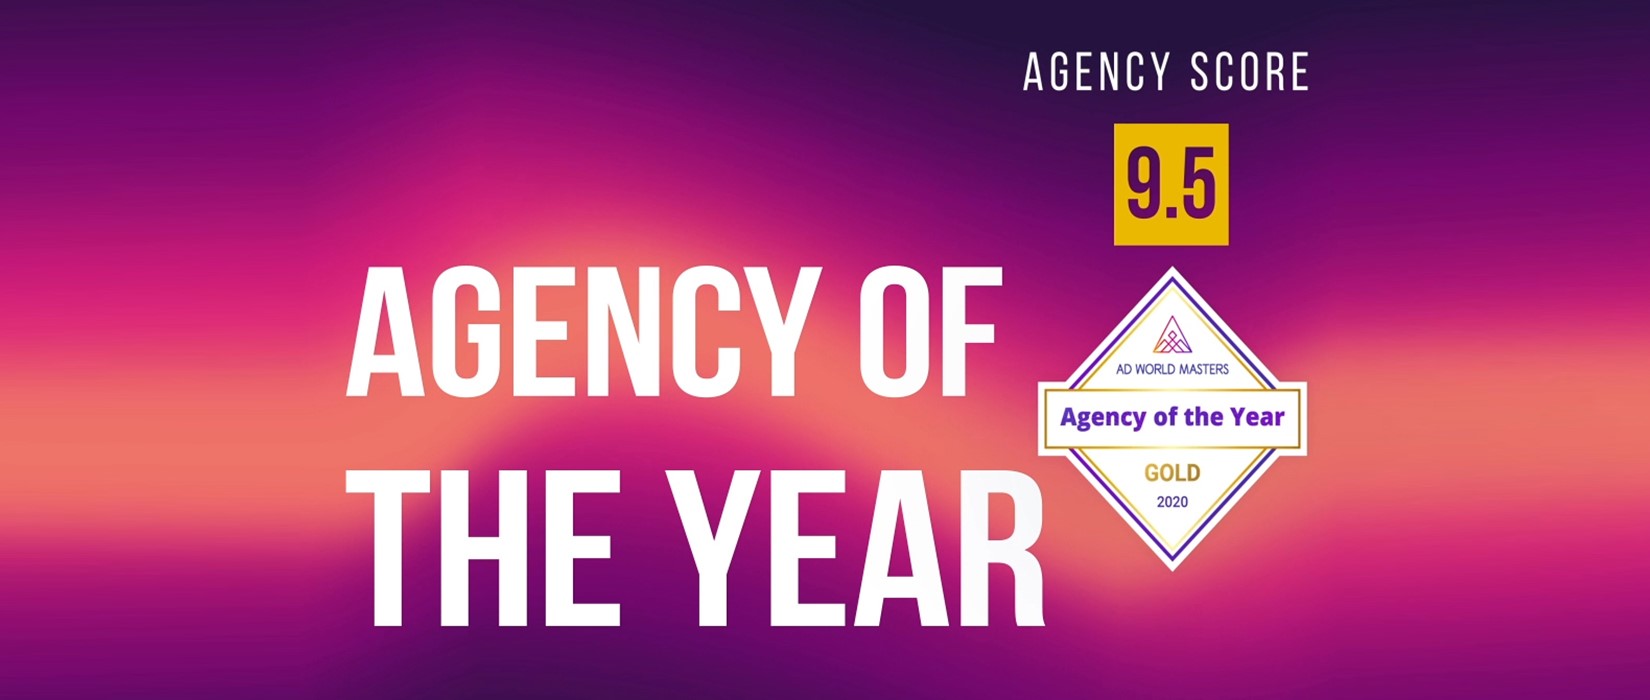 Agency of the Year - 2020 by AdWorldMasters